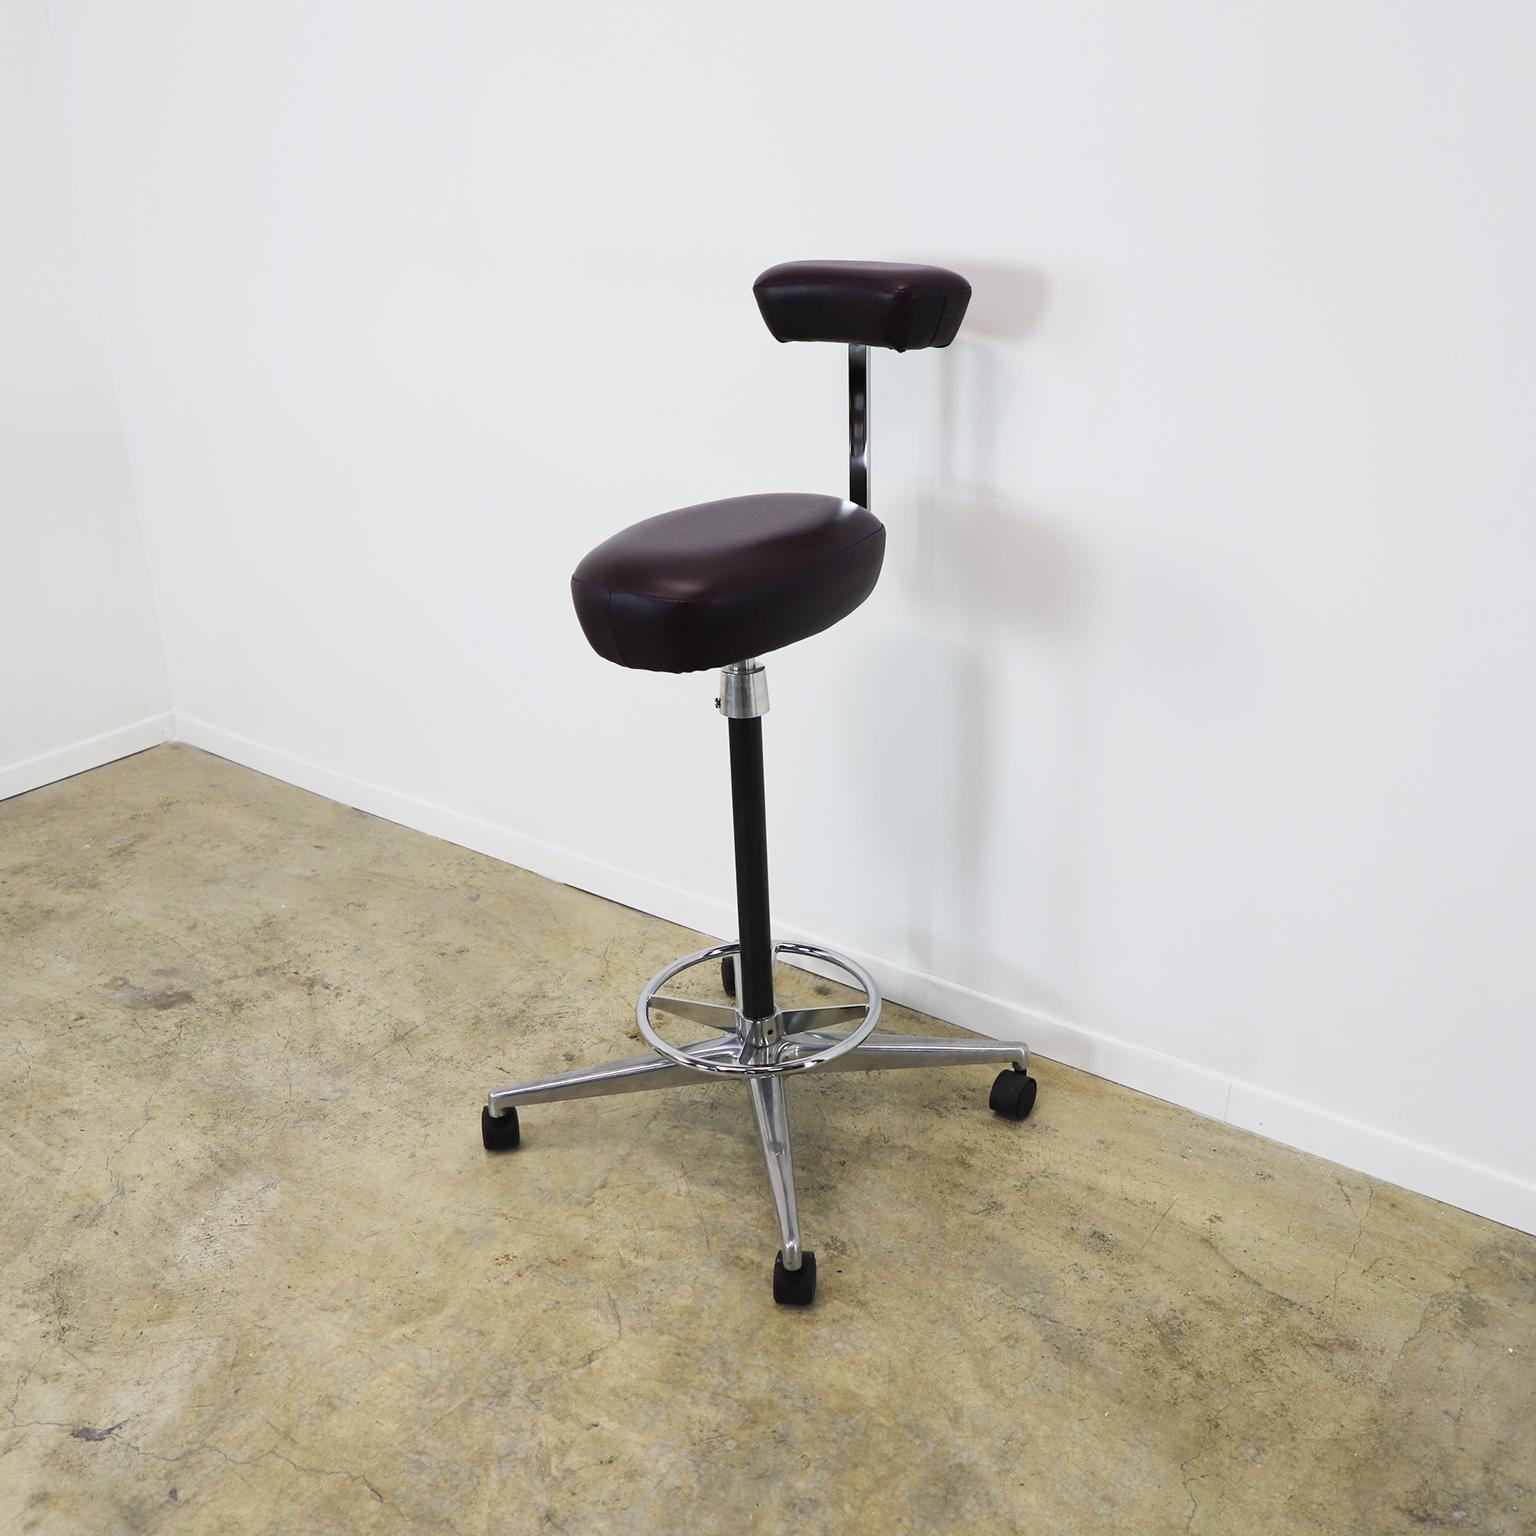 We offer this George Nelson Perch, includes Herman Miller original label, circa 1980.

About the Perch:

Designed in 1964 as part of the flexible, open, action office program, the Perch by George Nelson & assoc. is a versatile piece. With an